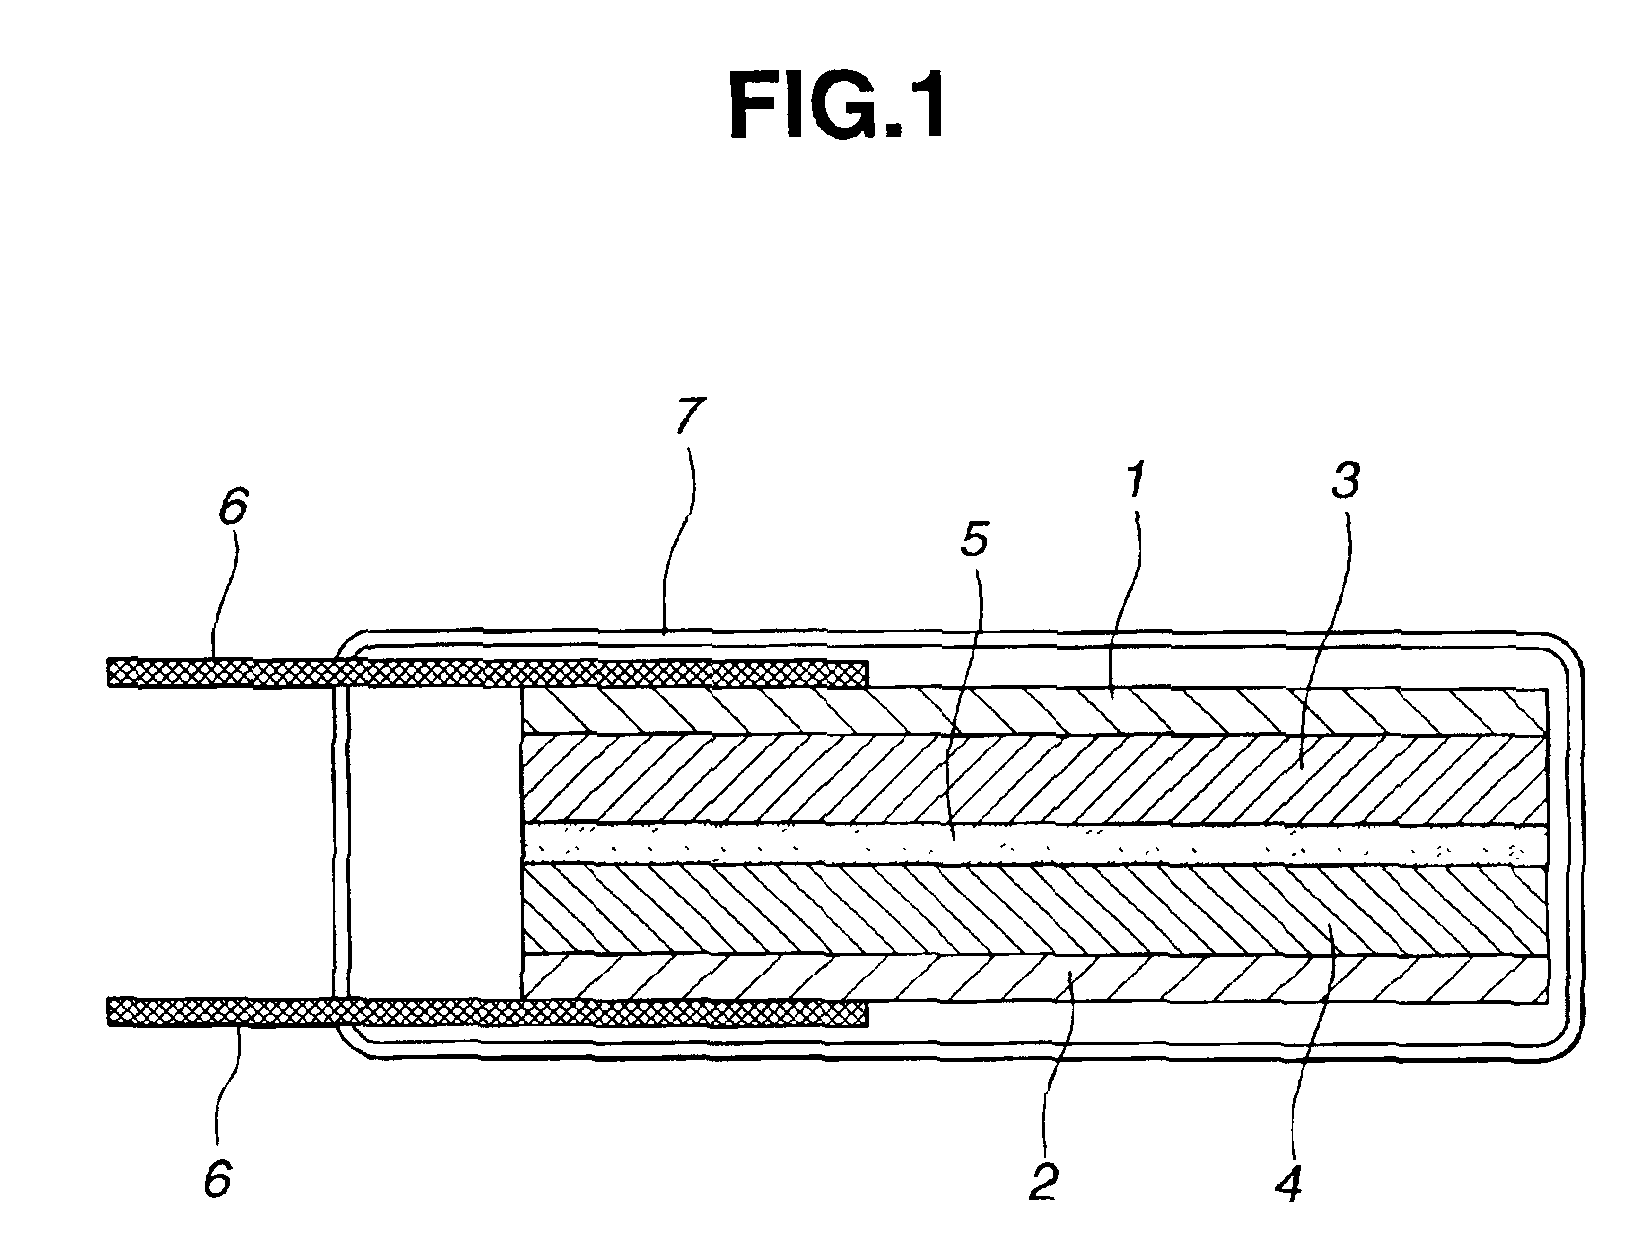 Polymer gel electrolyte and secondary cell